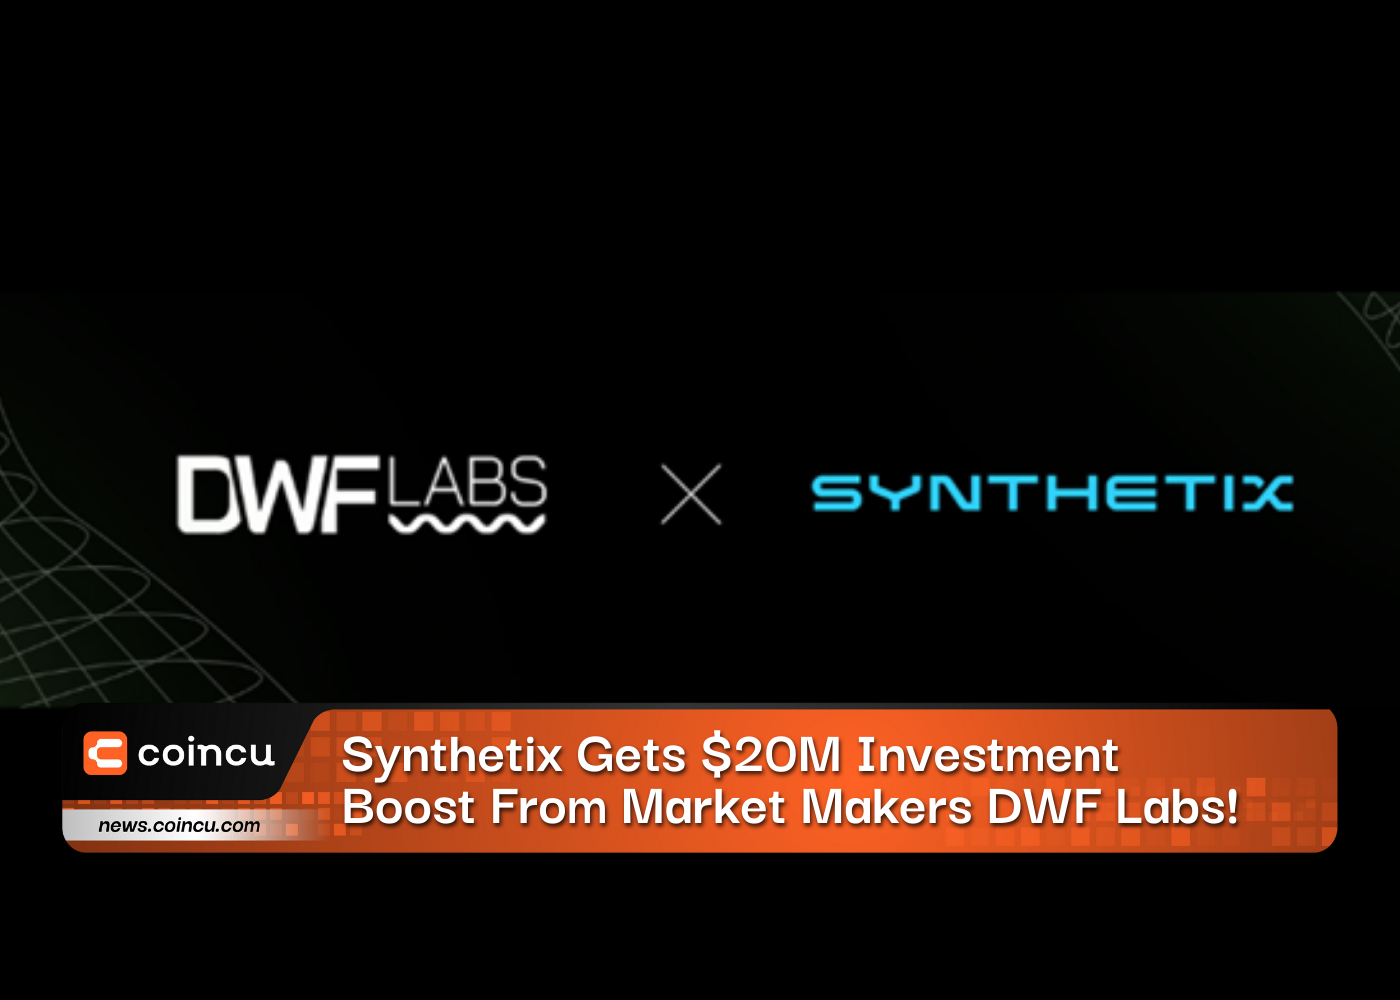 Synthetix Gets 20M Investment